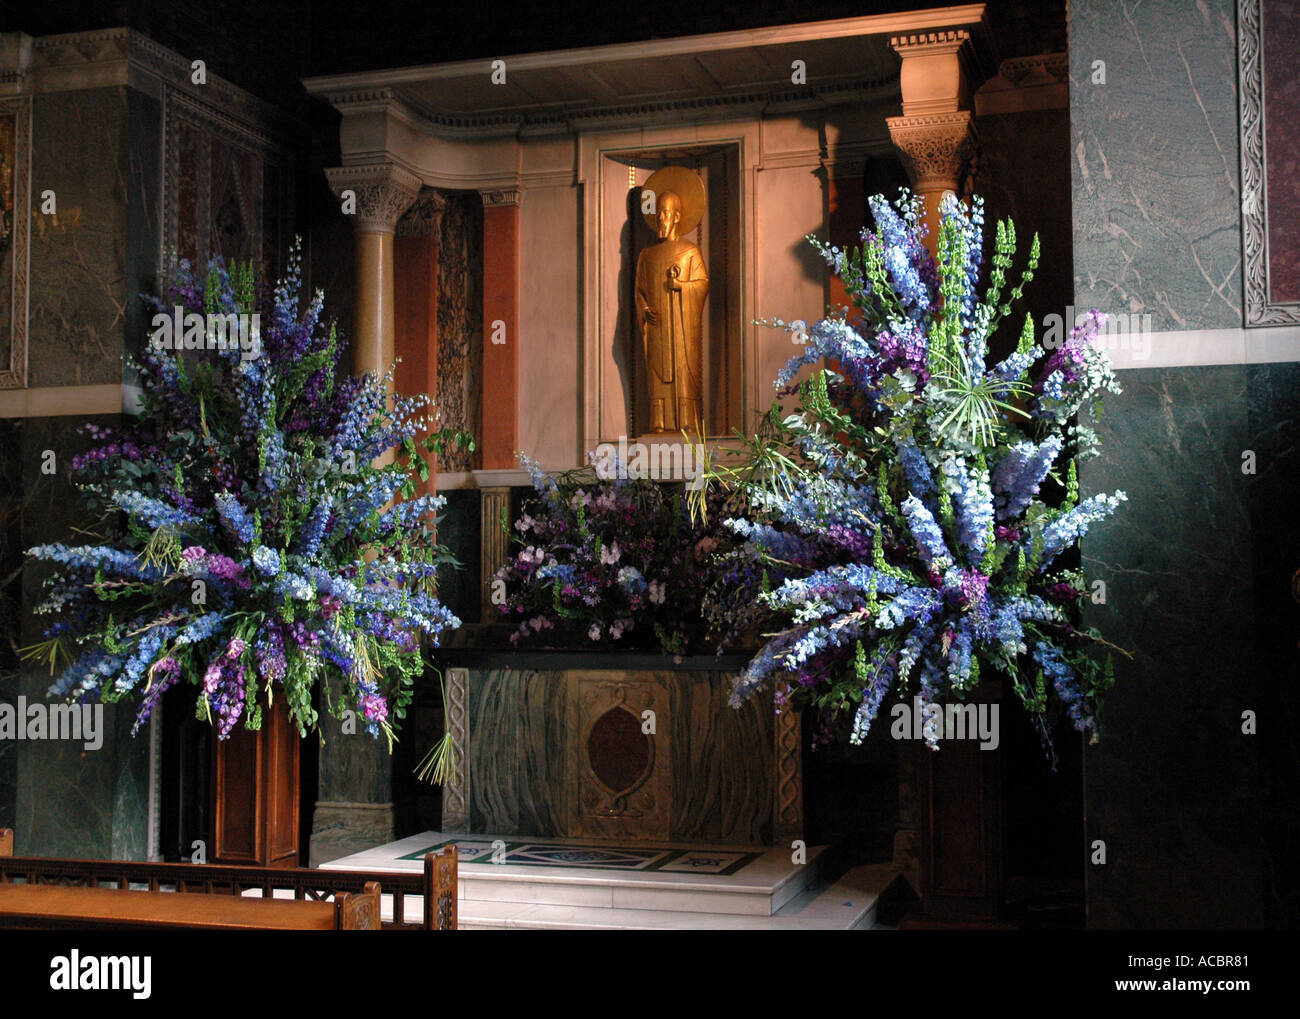 Flower Festival at Westminster Cathedral Londin Uk Stock Photo